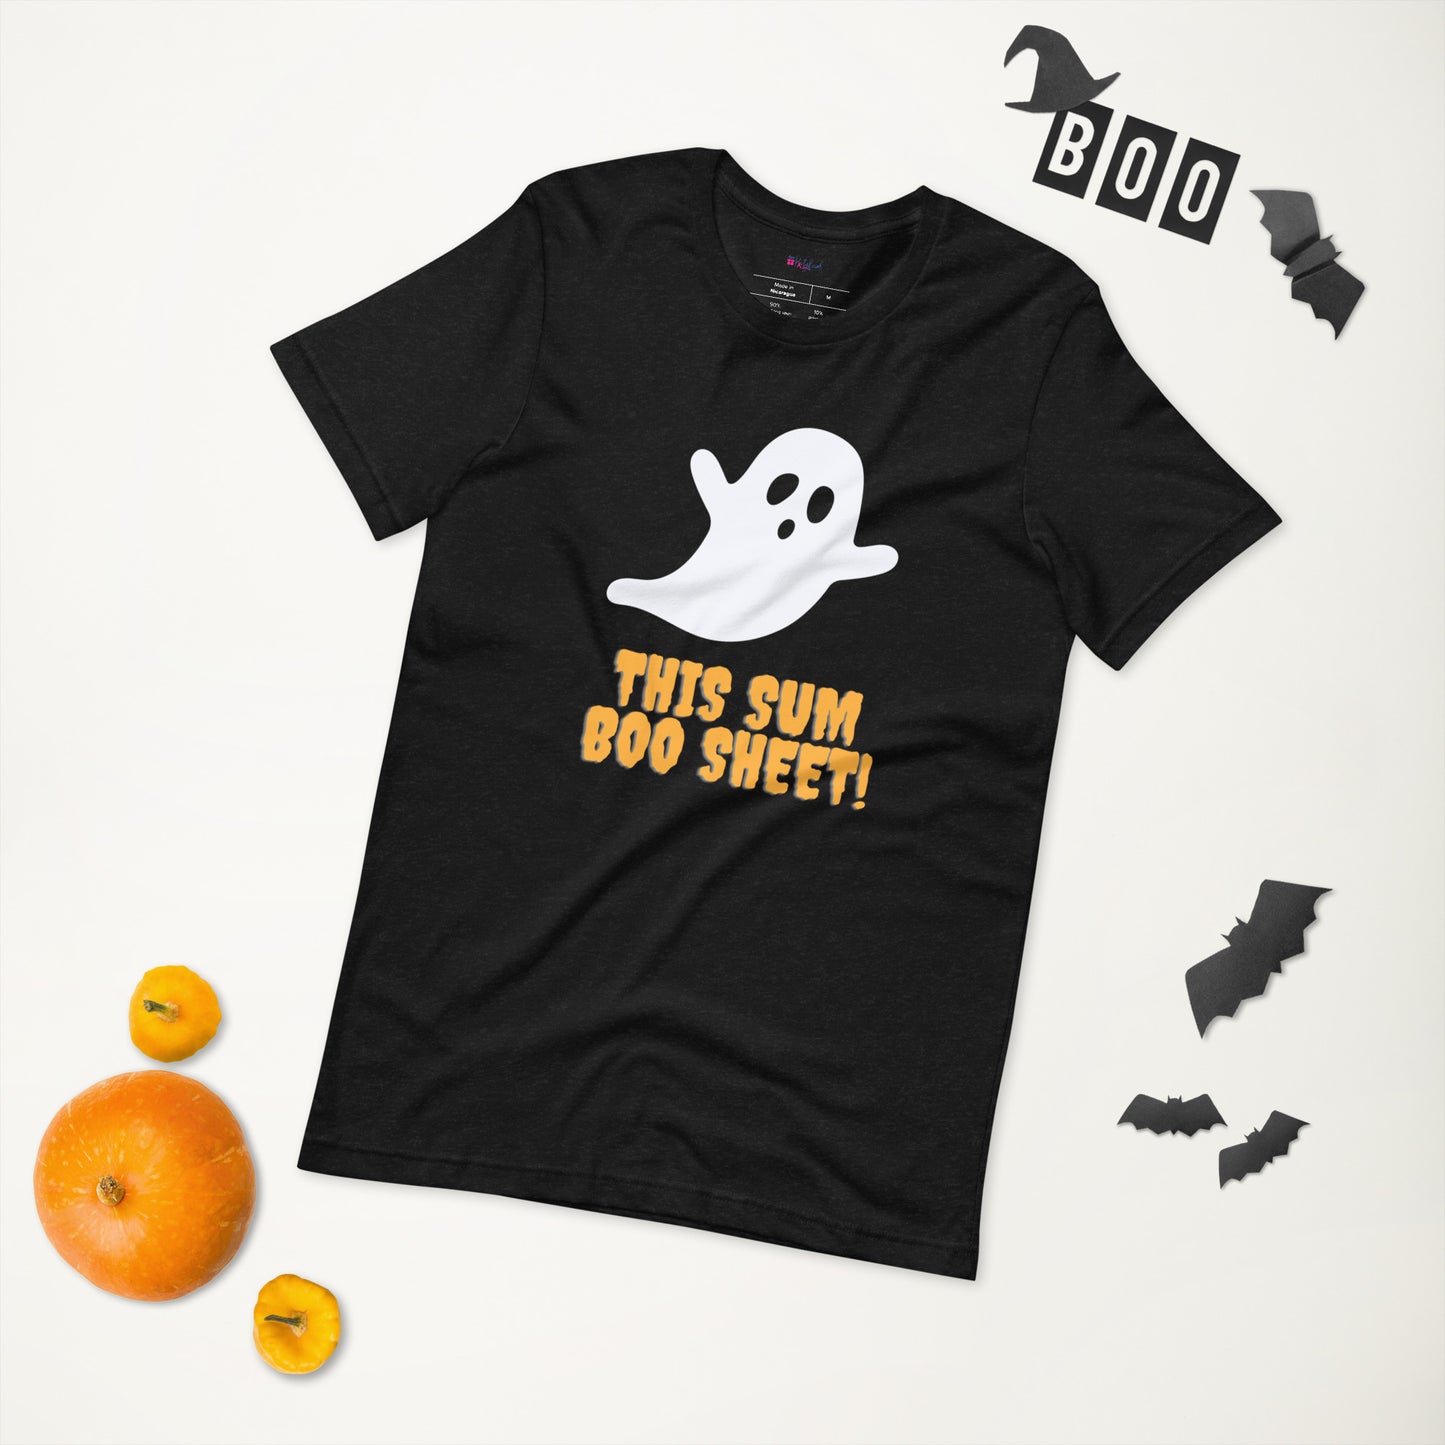 This is Boo Sheet! t-shirt